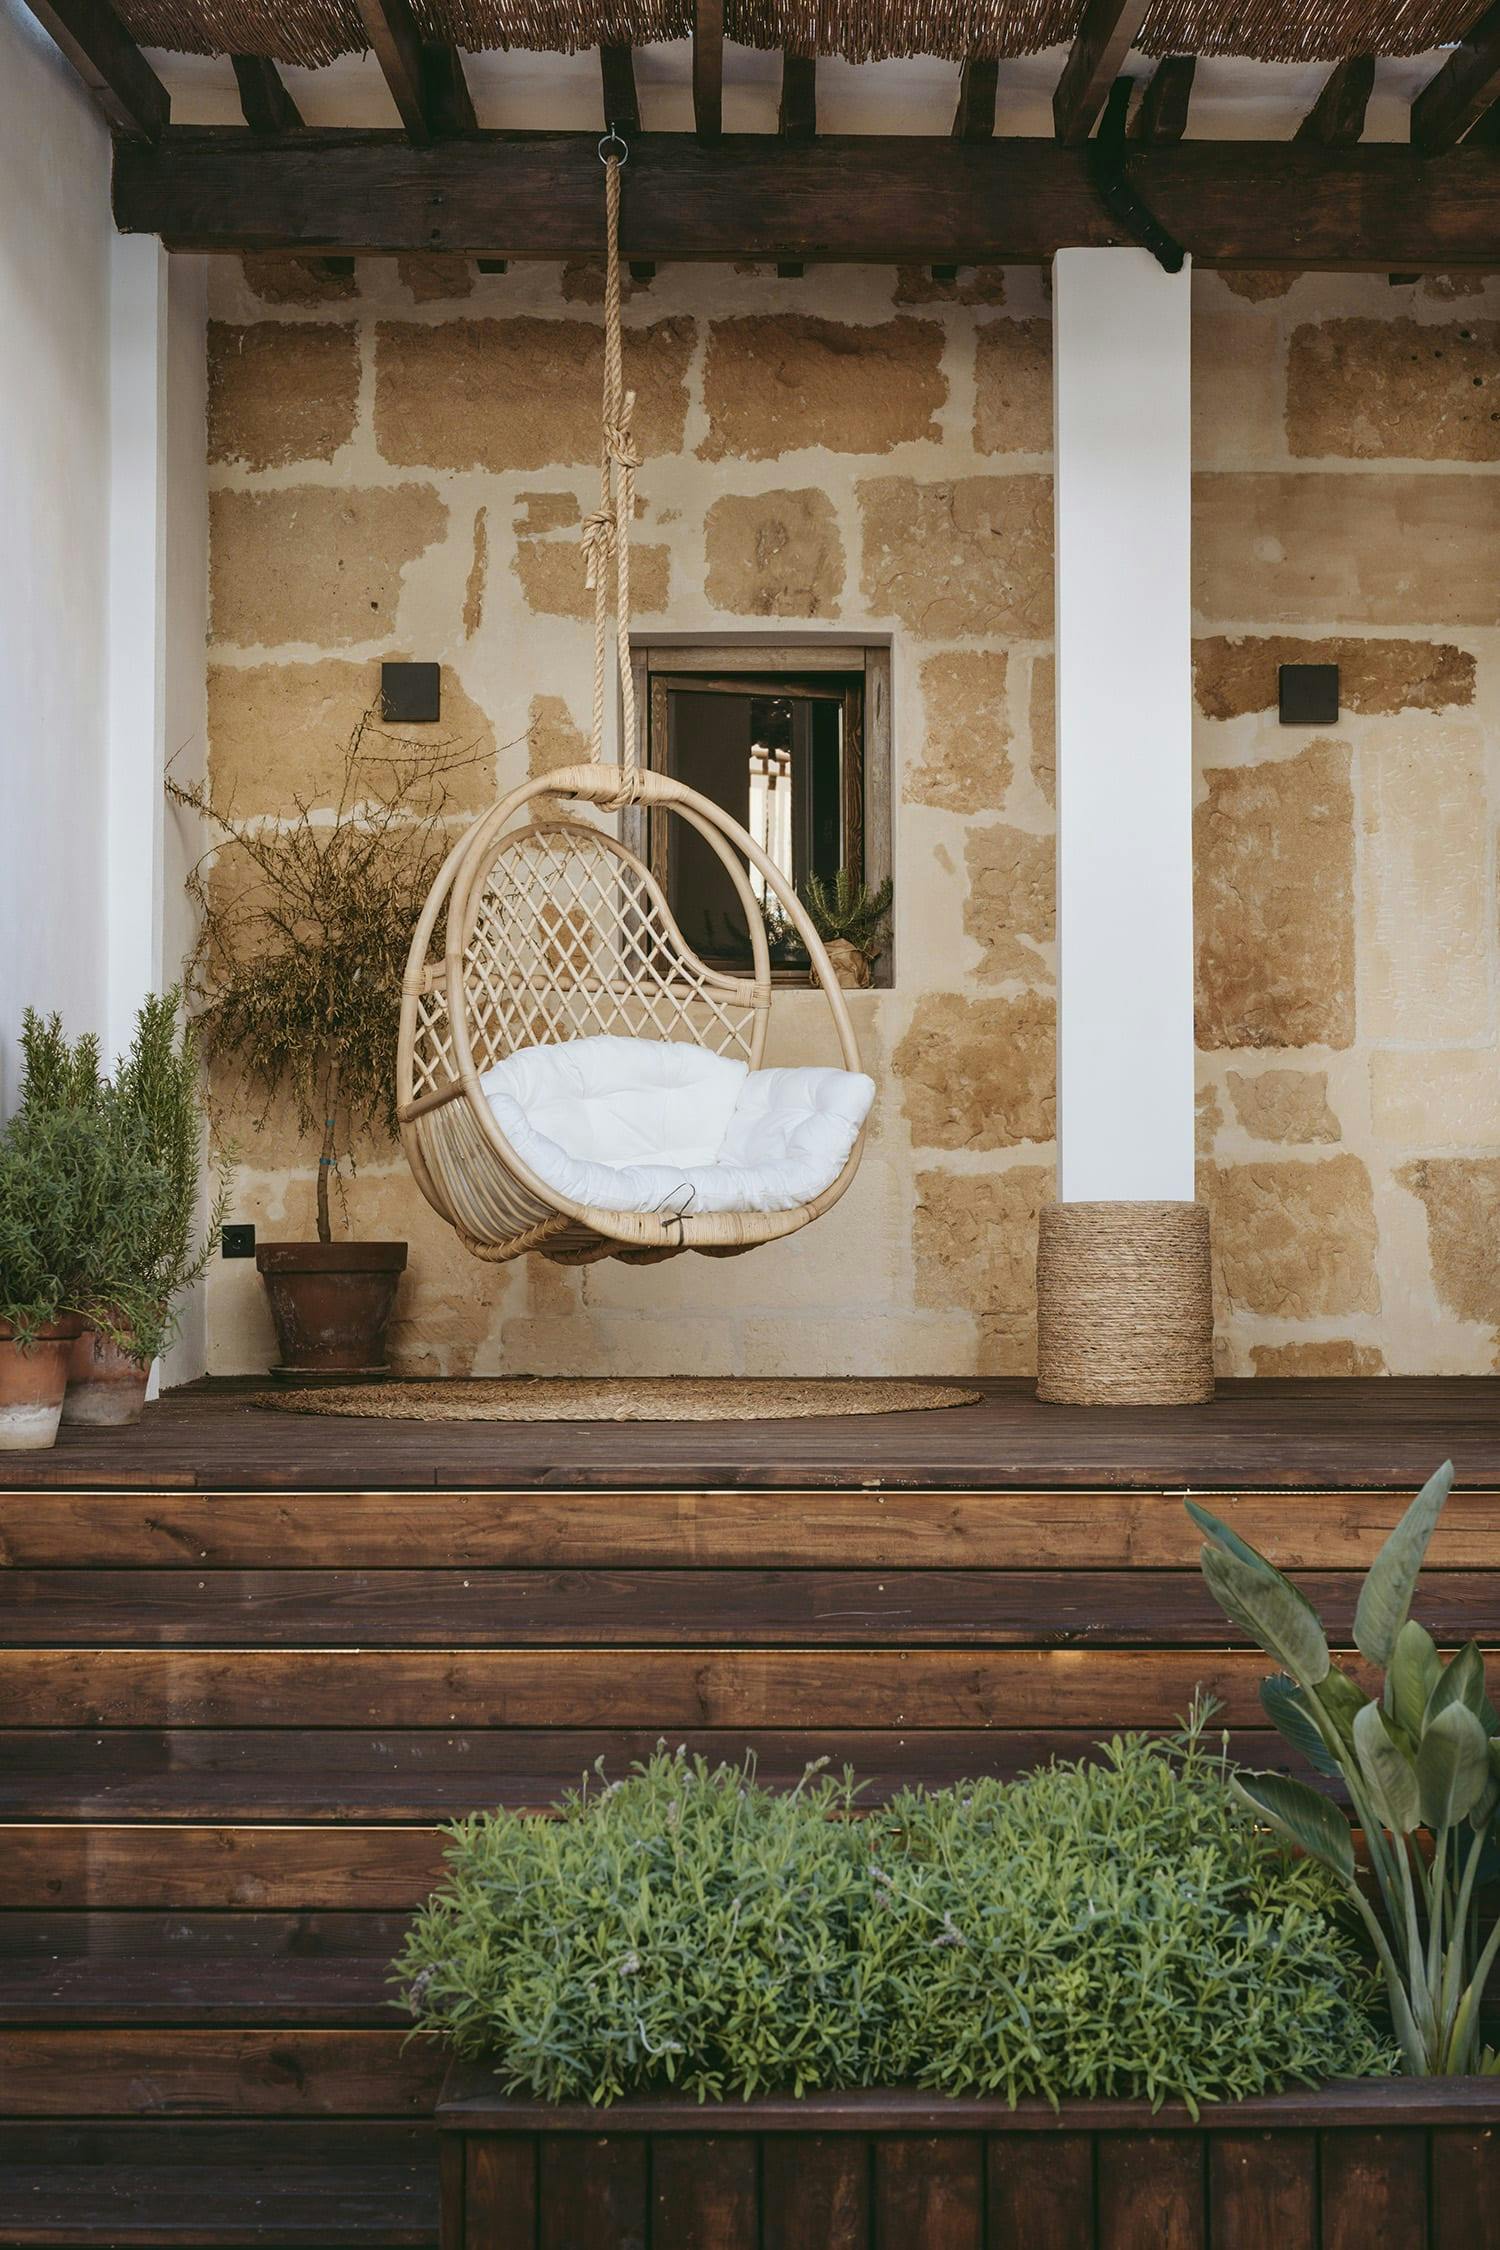 A wooden deck with a wicker chair and a hanging basket of plants is shown in the image.